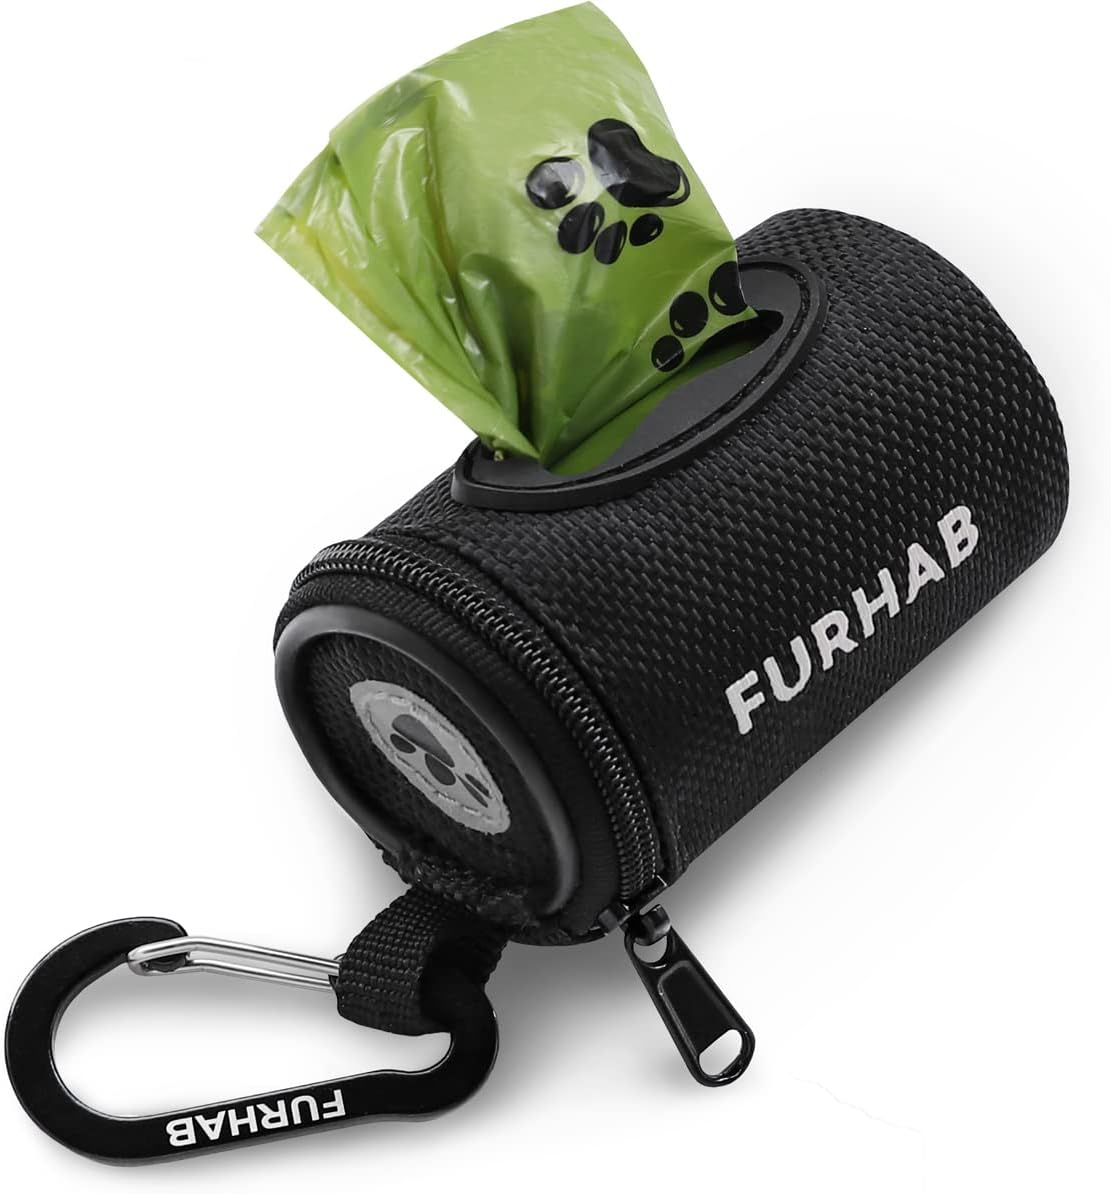 A cylindrical black Furhab dog waste bag dispenser is depicted with a green dog poop bag emerging from the top. The holder dispenser features a zipper, a black carabiner clip, and the brand name "FURHAB" printed in white.